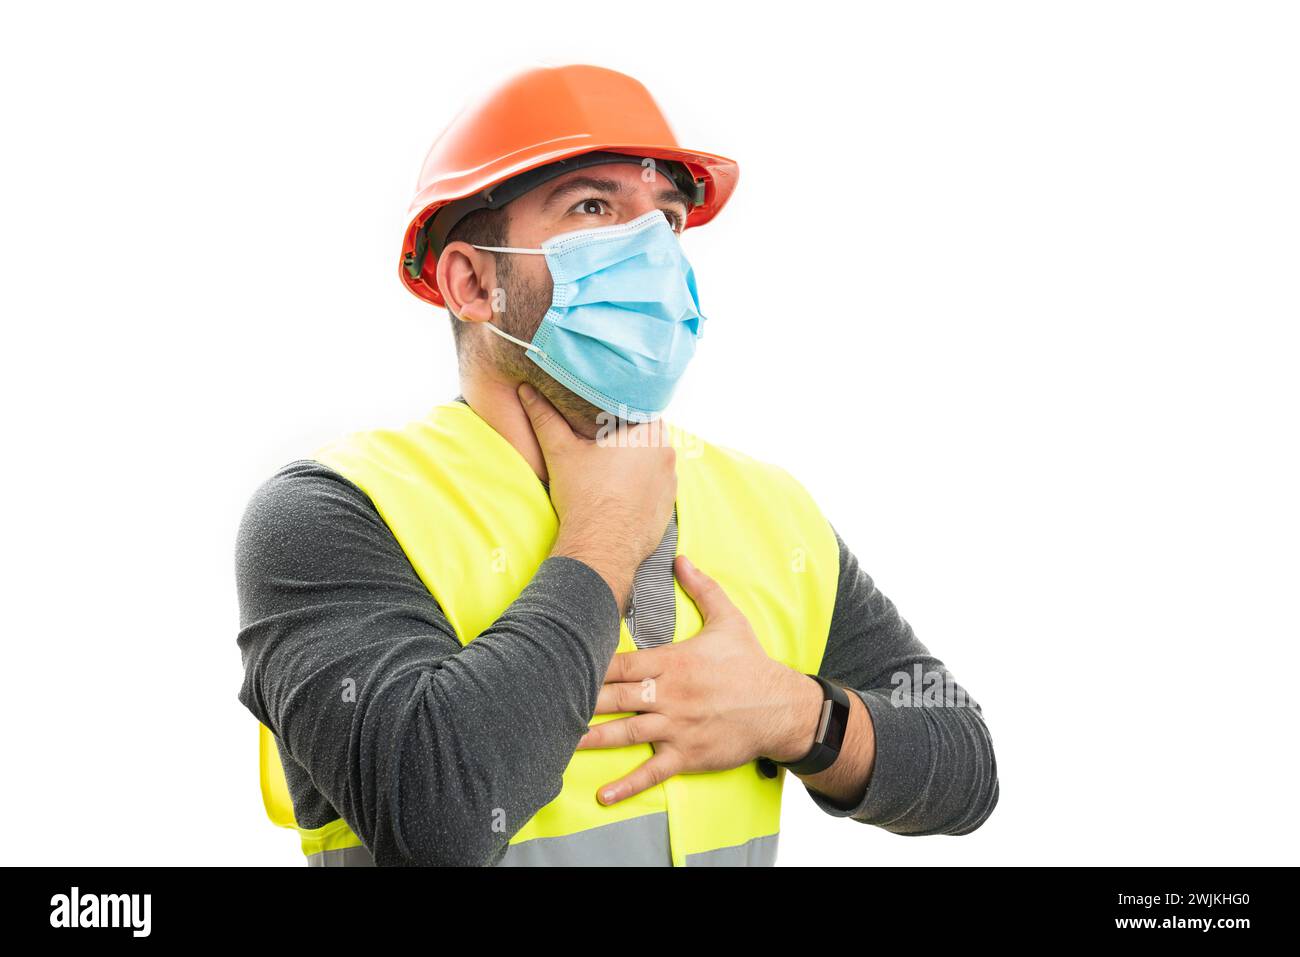 Adult builder man wearing medical or surgical mask to prevent sars covid19 flu infection making choking gesture isolated on white studio background Stock Photo